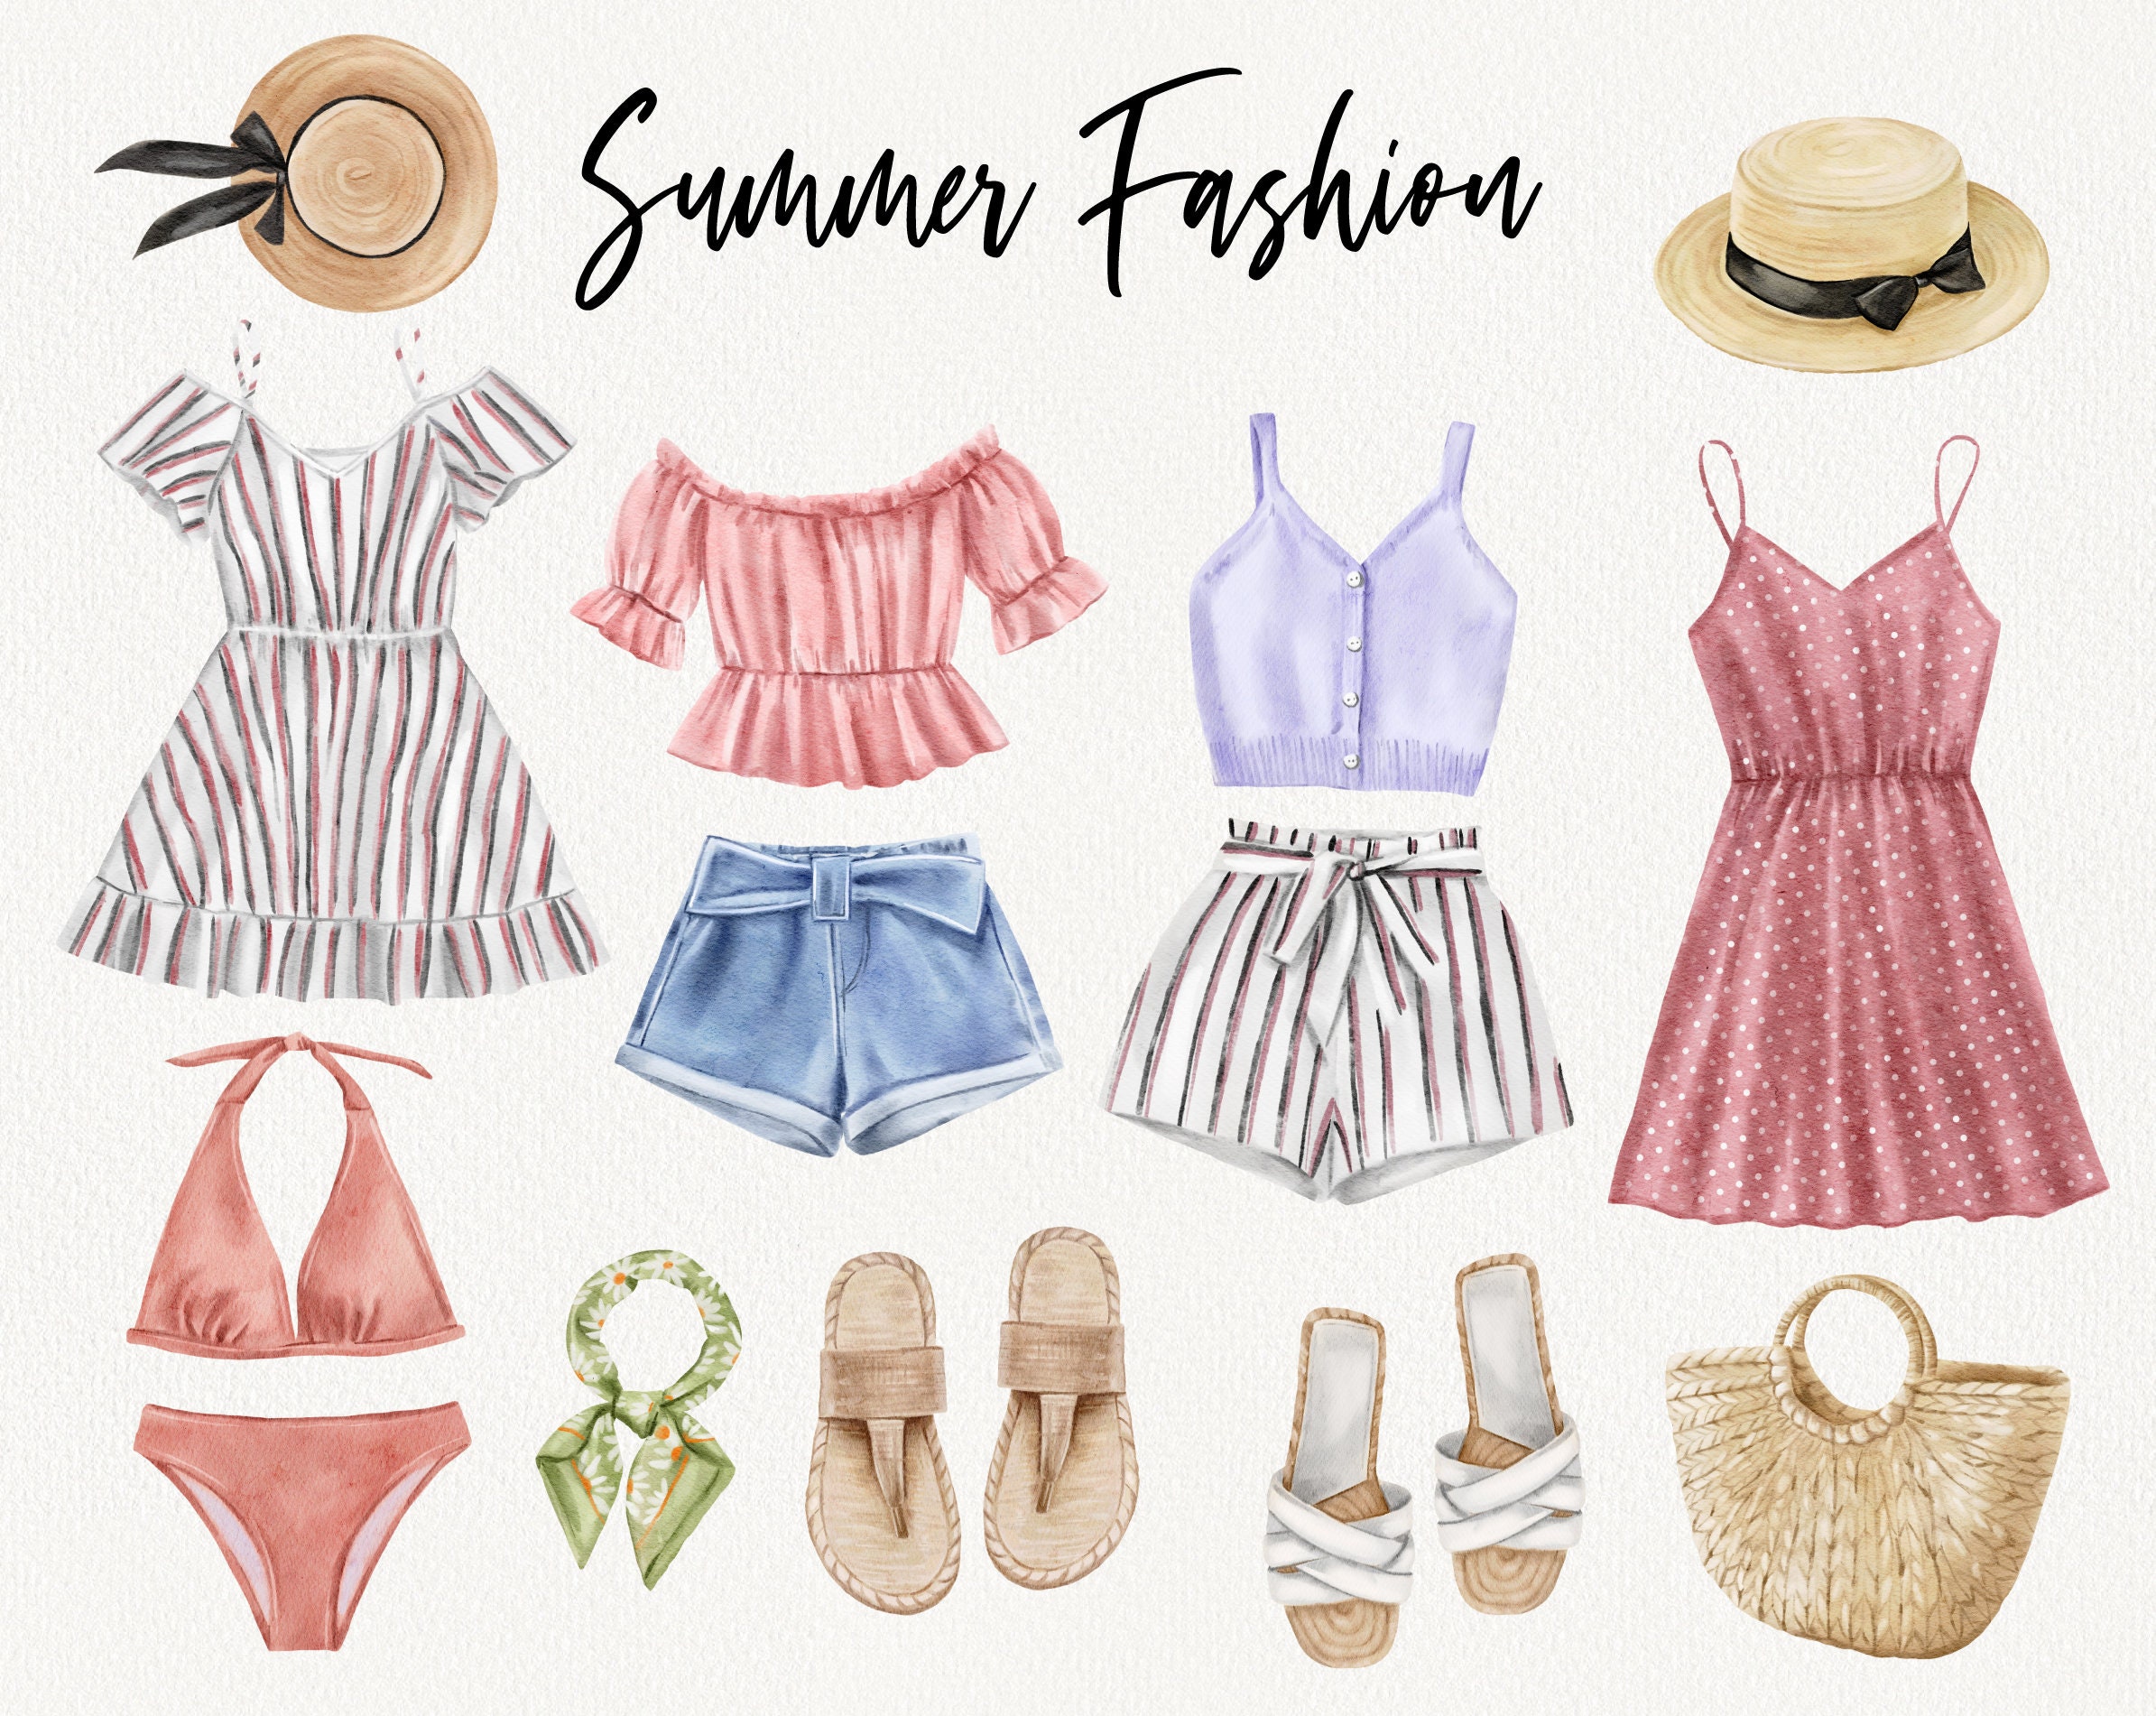 Fashion summer clothes. Clothing clipart, flat dress swimsui